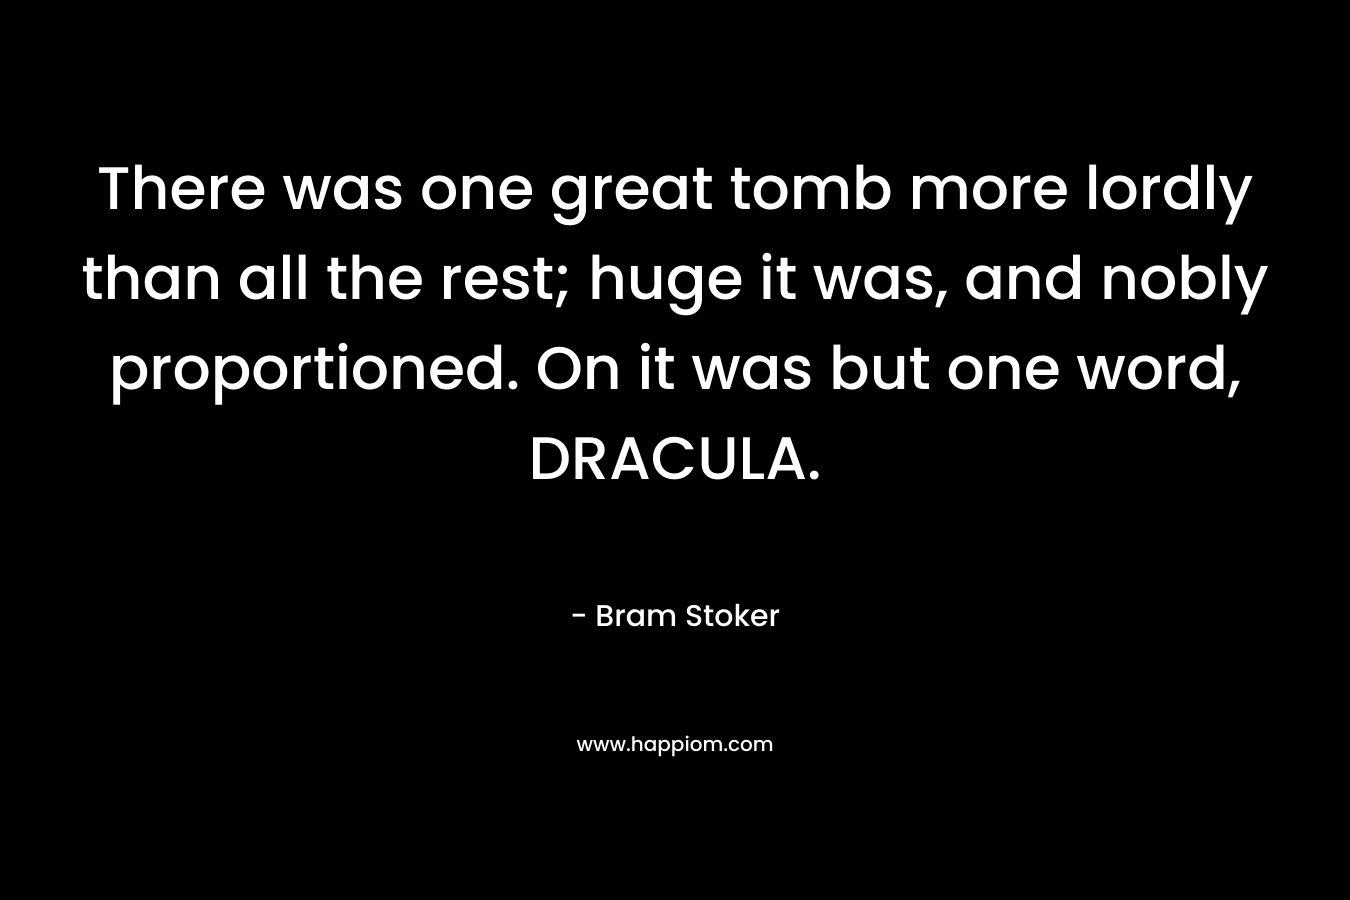 There was one great tomb more lordly than all the rest; huge it was, and nobly proportioned. On it was but one word, DRACULA. – Bram Stoker